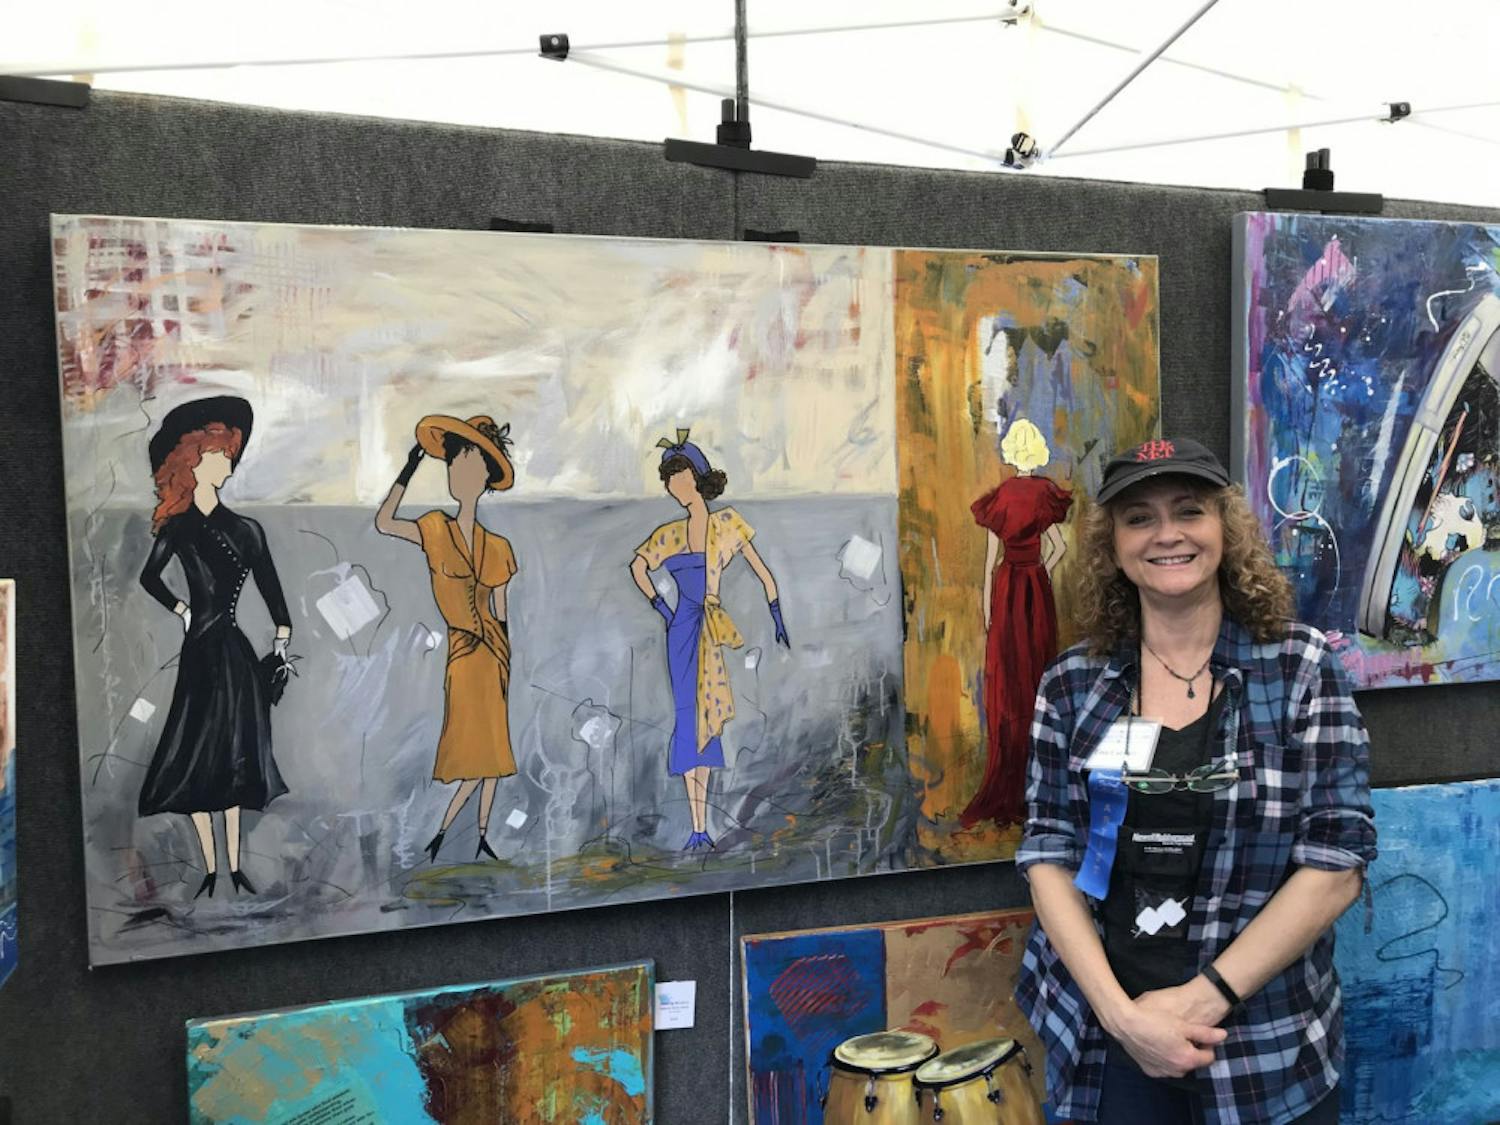 Tina Corbett, artist and owner of Lanza Gallery &amp; Art Supplies, works her art booth at the 37th Annual Downtown Festival &amp; Art Show Sunday. The painting is called “Me Too.”
&nbsp;